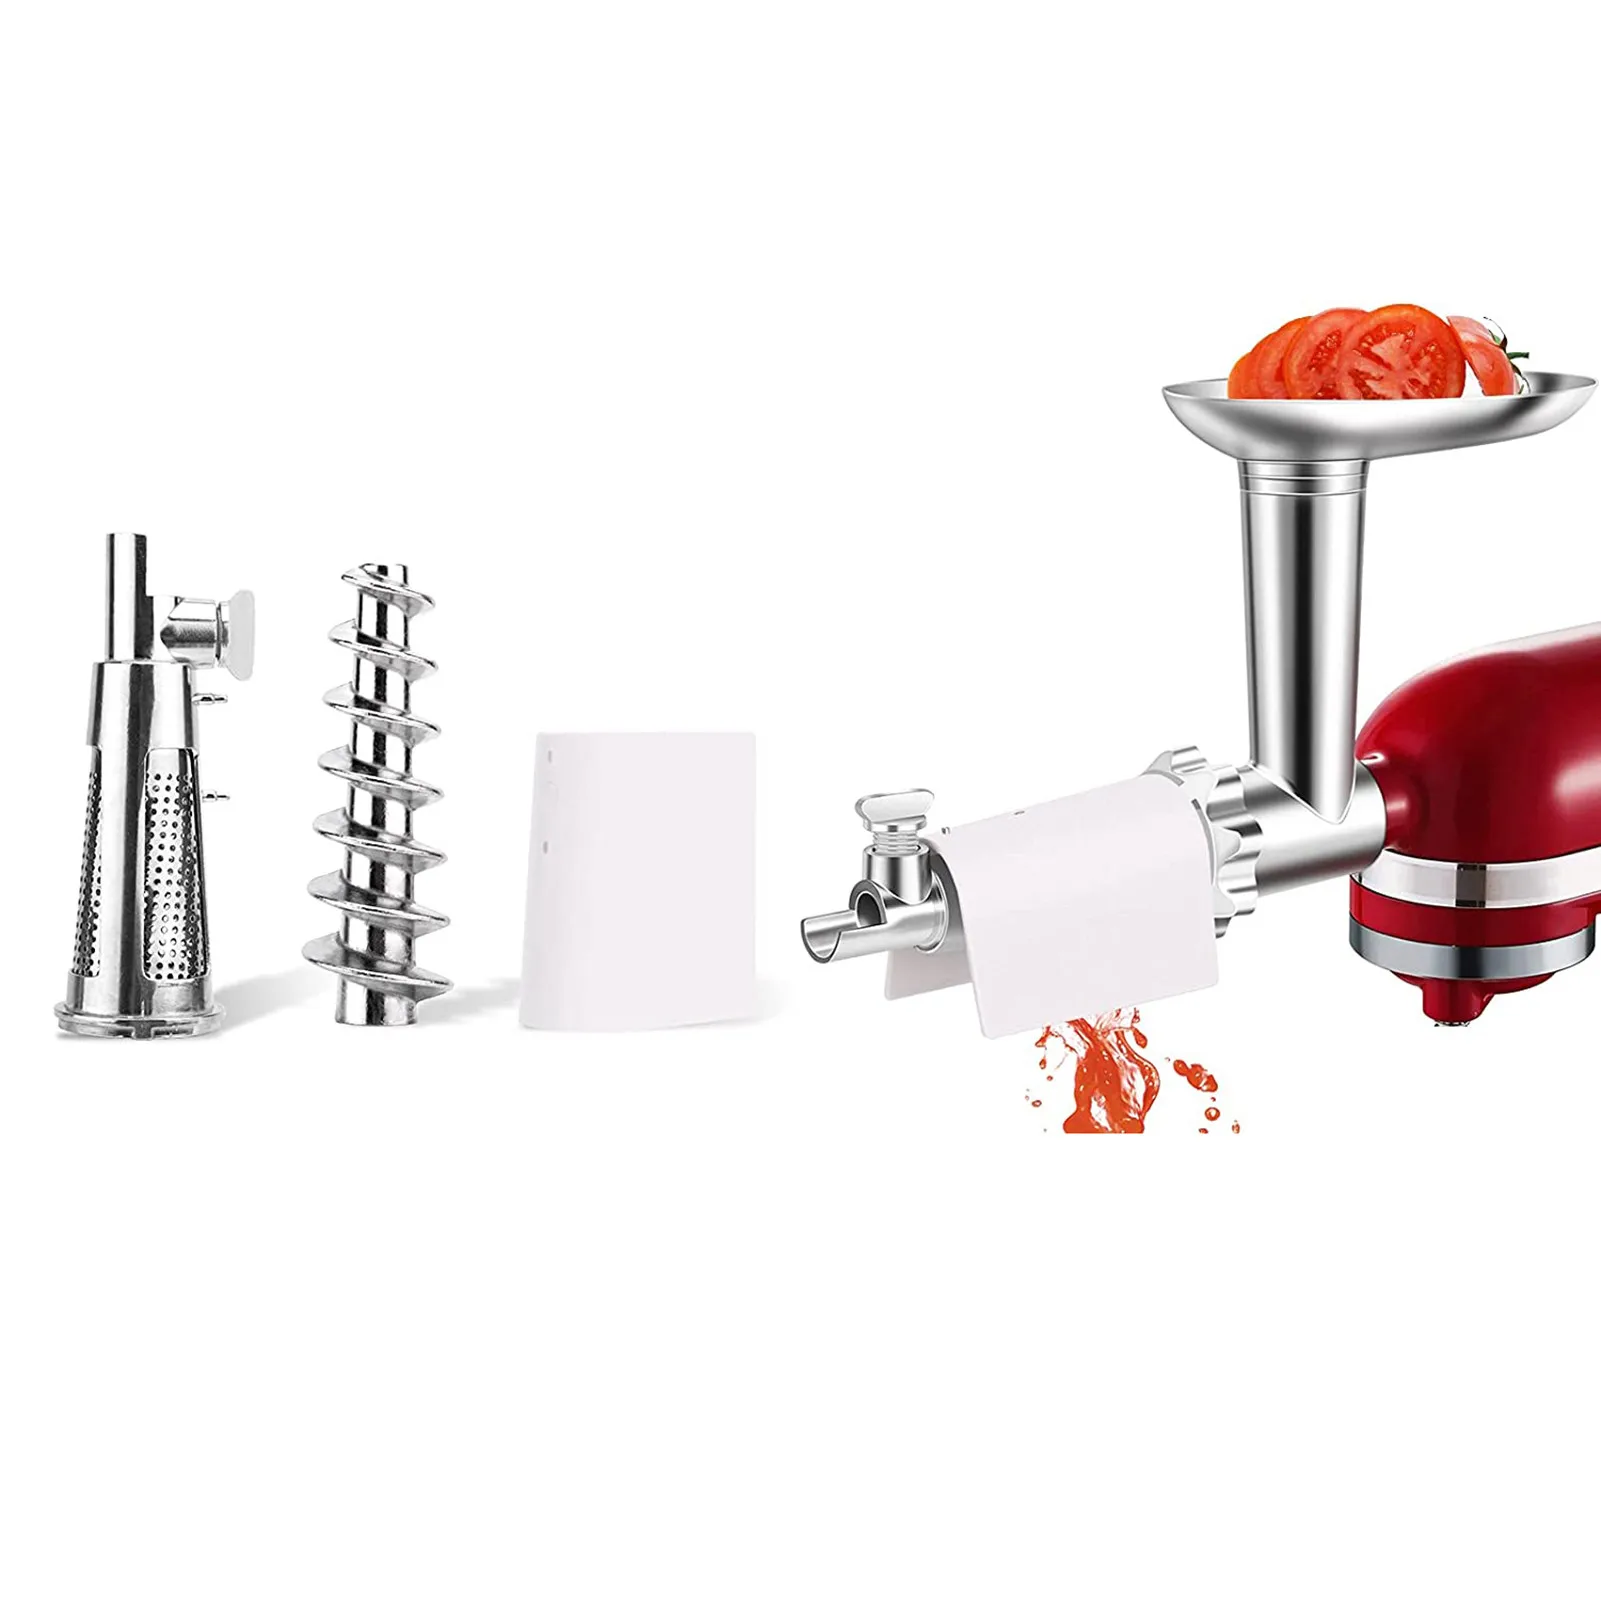 Juicer Accessories Meat Grinder Tomato Juicer Screw Shaft Filter Sleeve Baffle Accessories for Mixer Attachment 